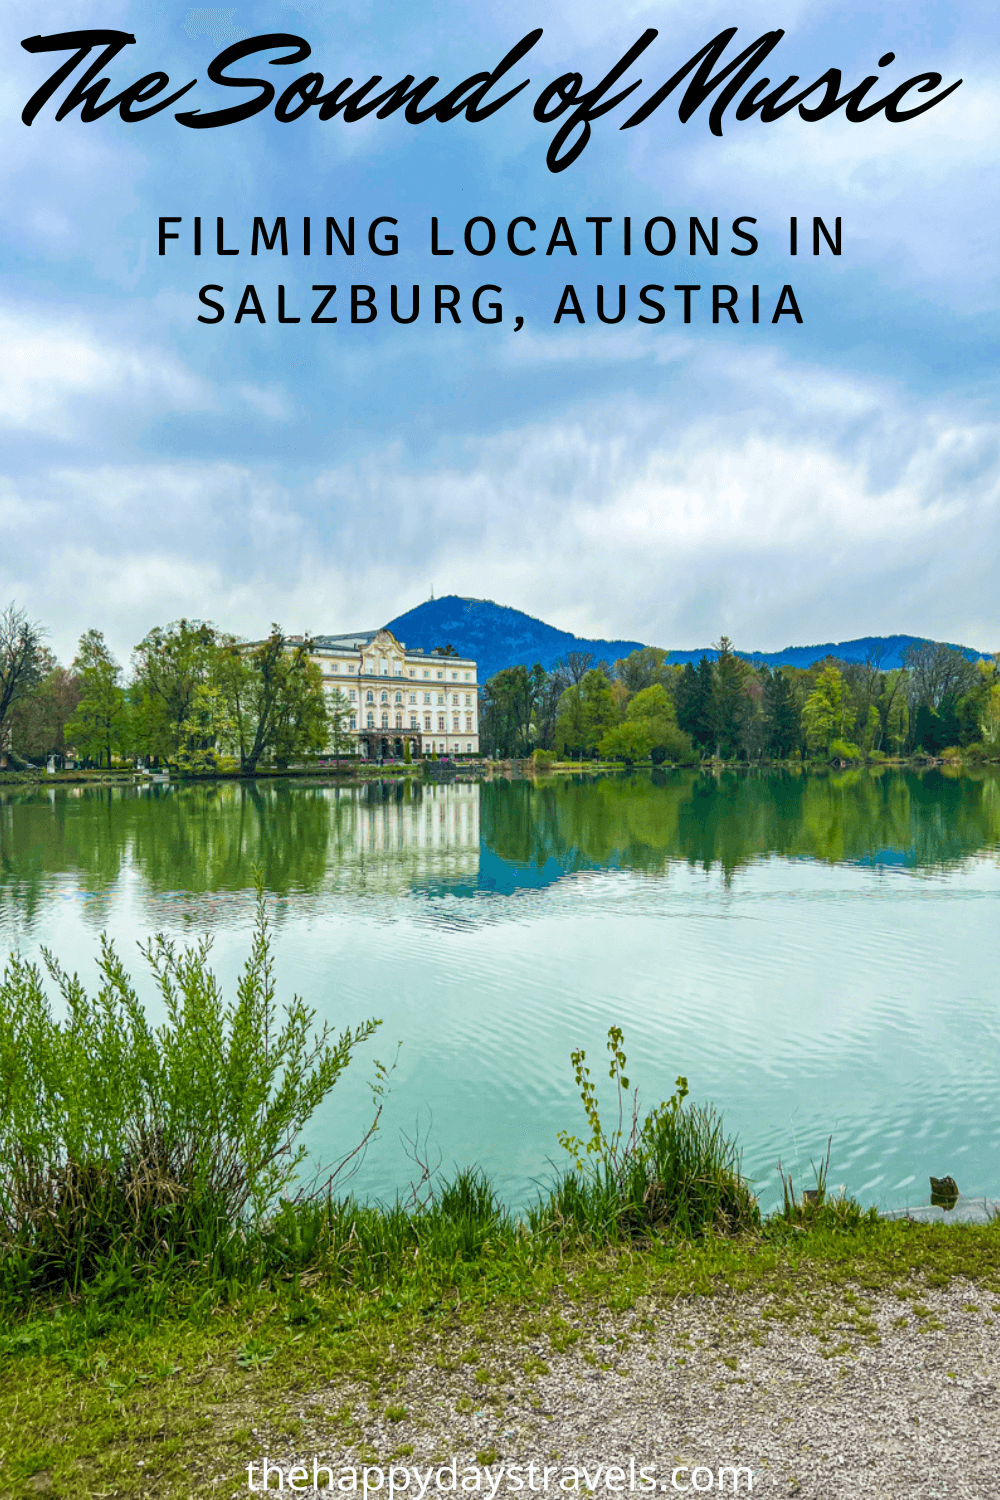 Pin image for The Sound of Music filming locations in Salzburg, Austria. Image of Von Trapp family home and lake in Salzburg